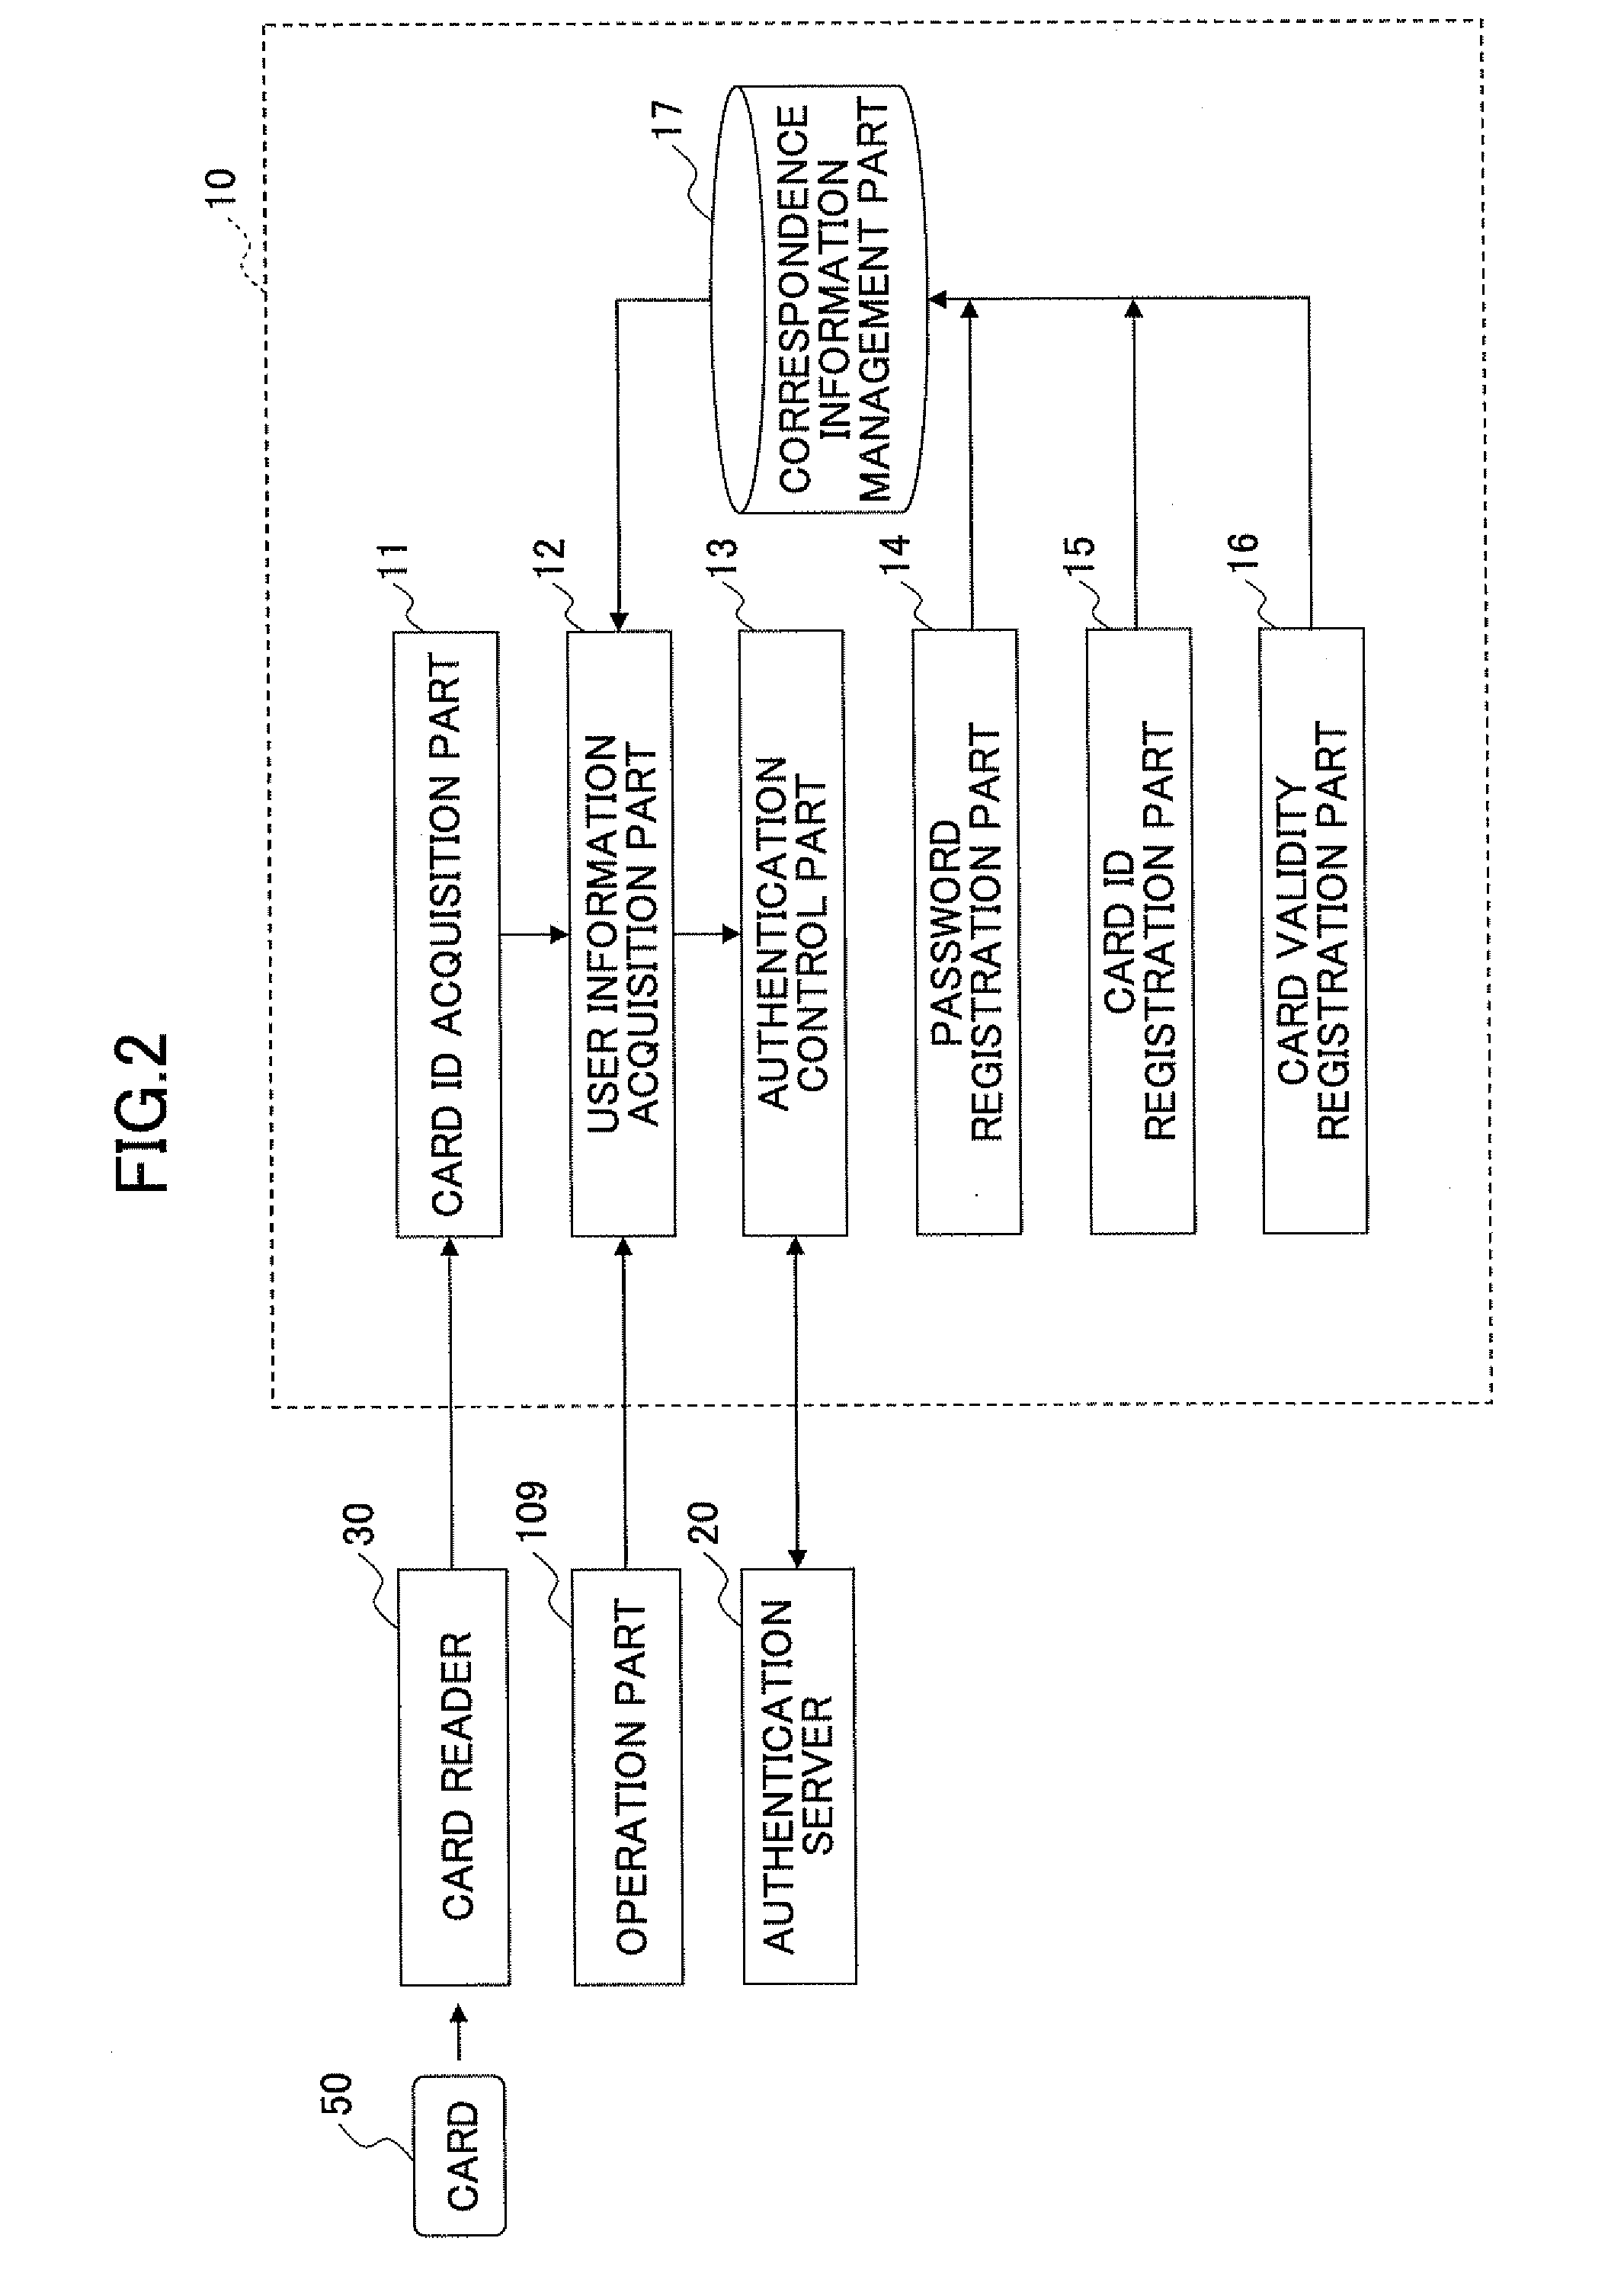 Image forming apparatus performing user authentication using a card